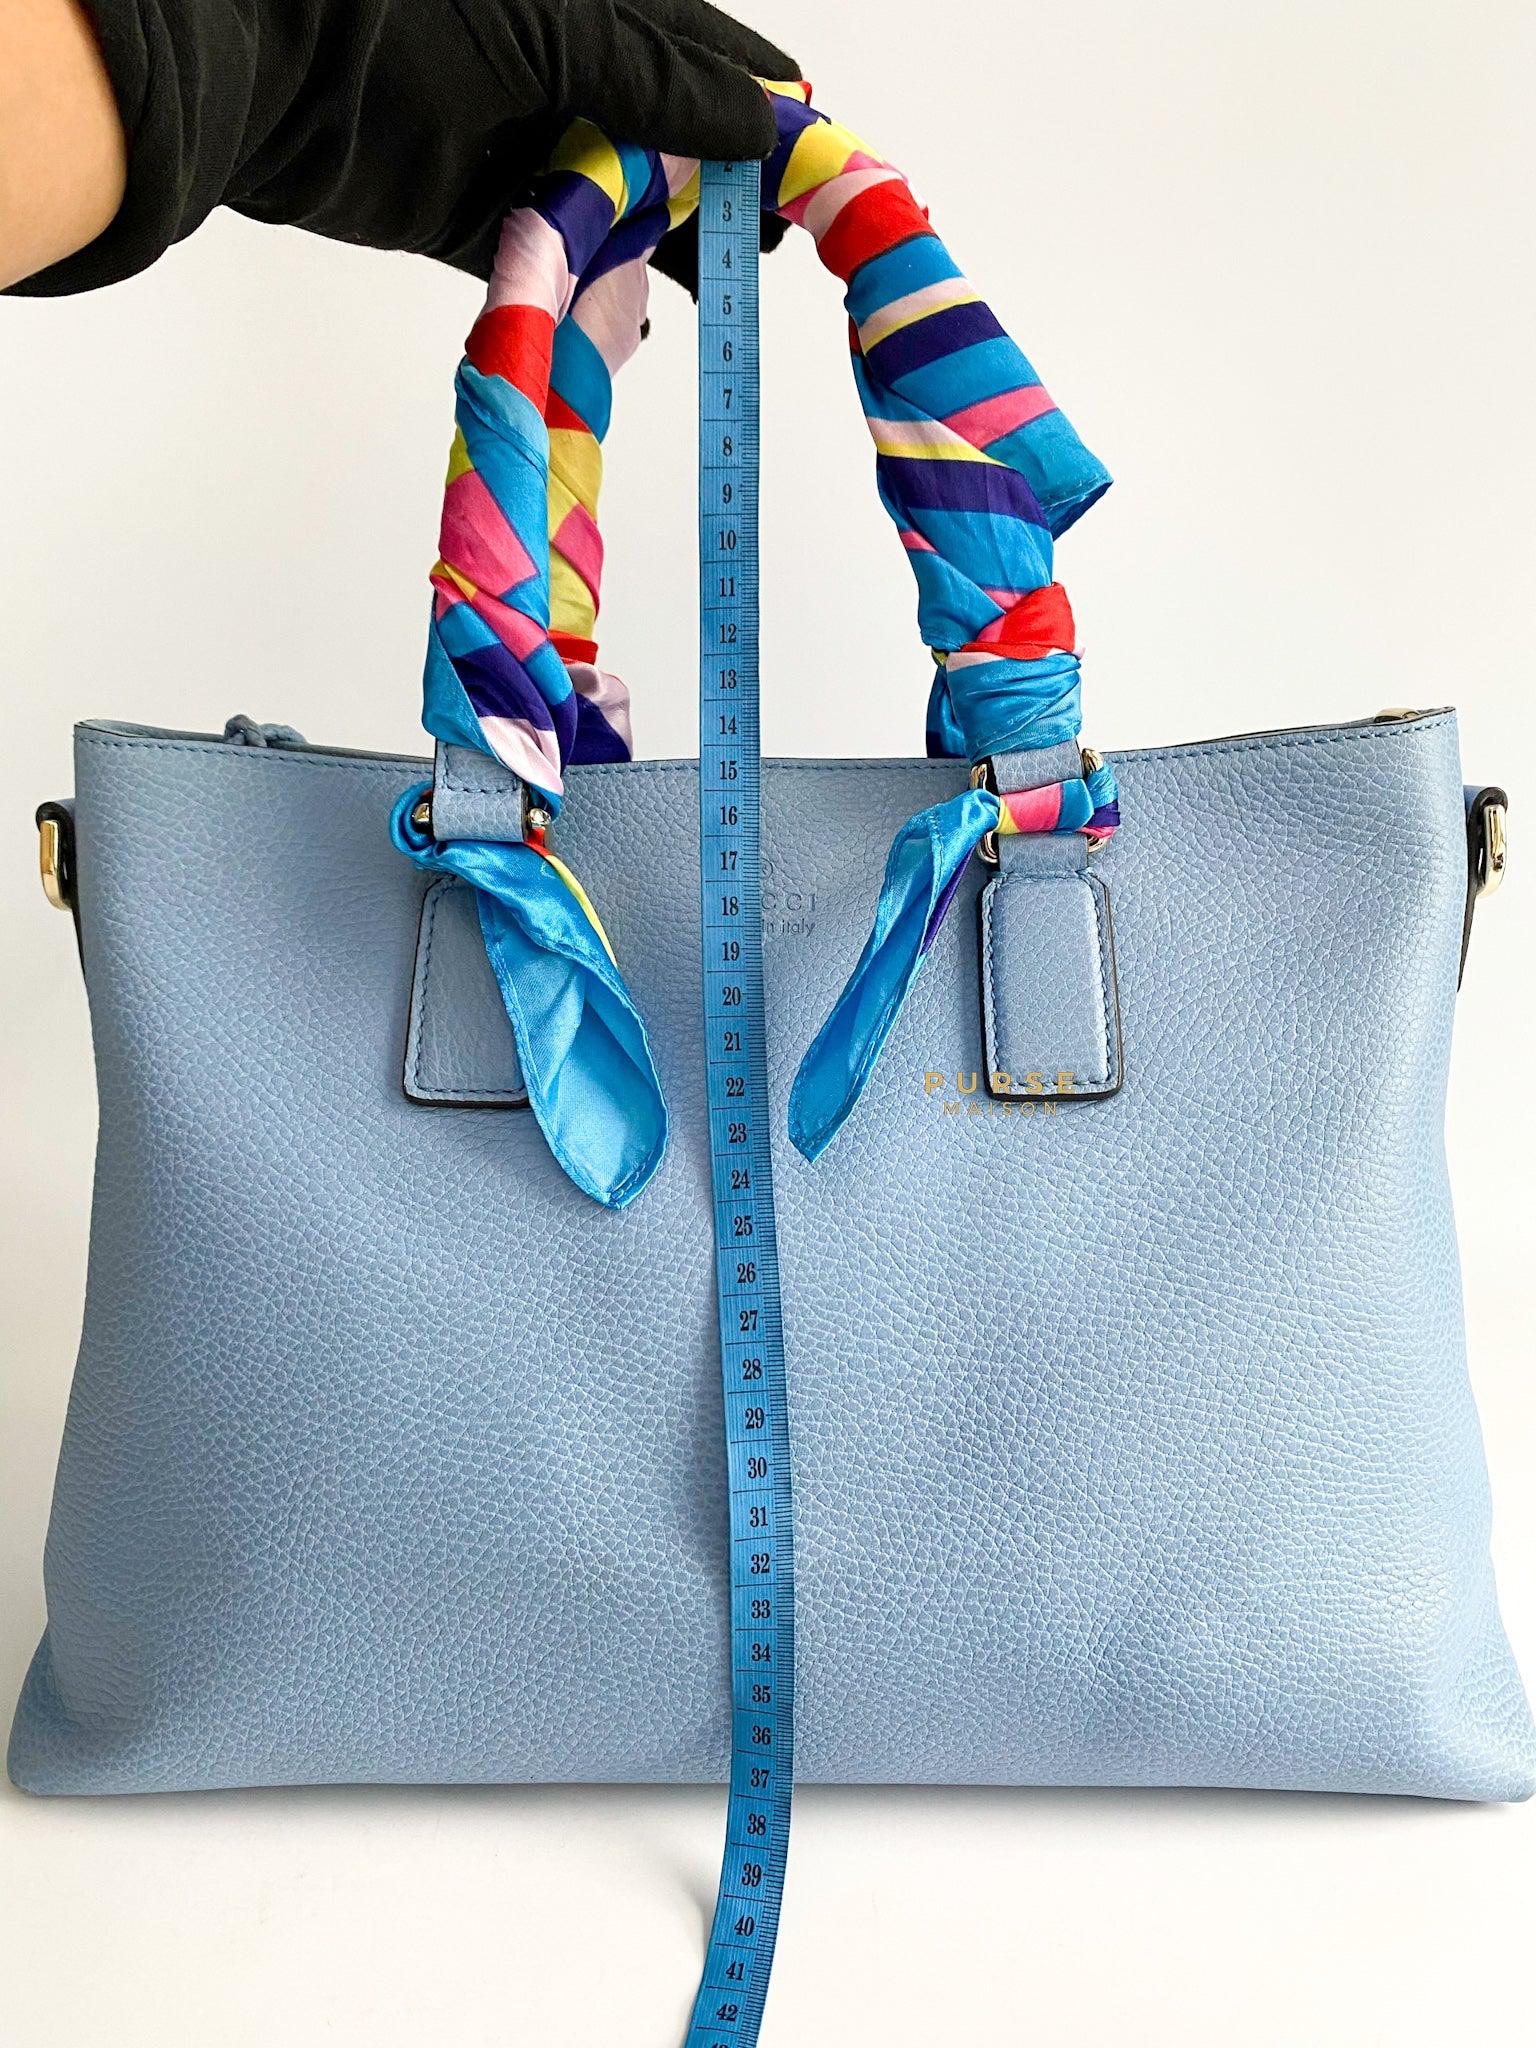 Gucci Bamboo Light Blue Leather Tote Bag